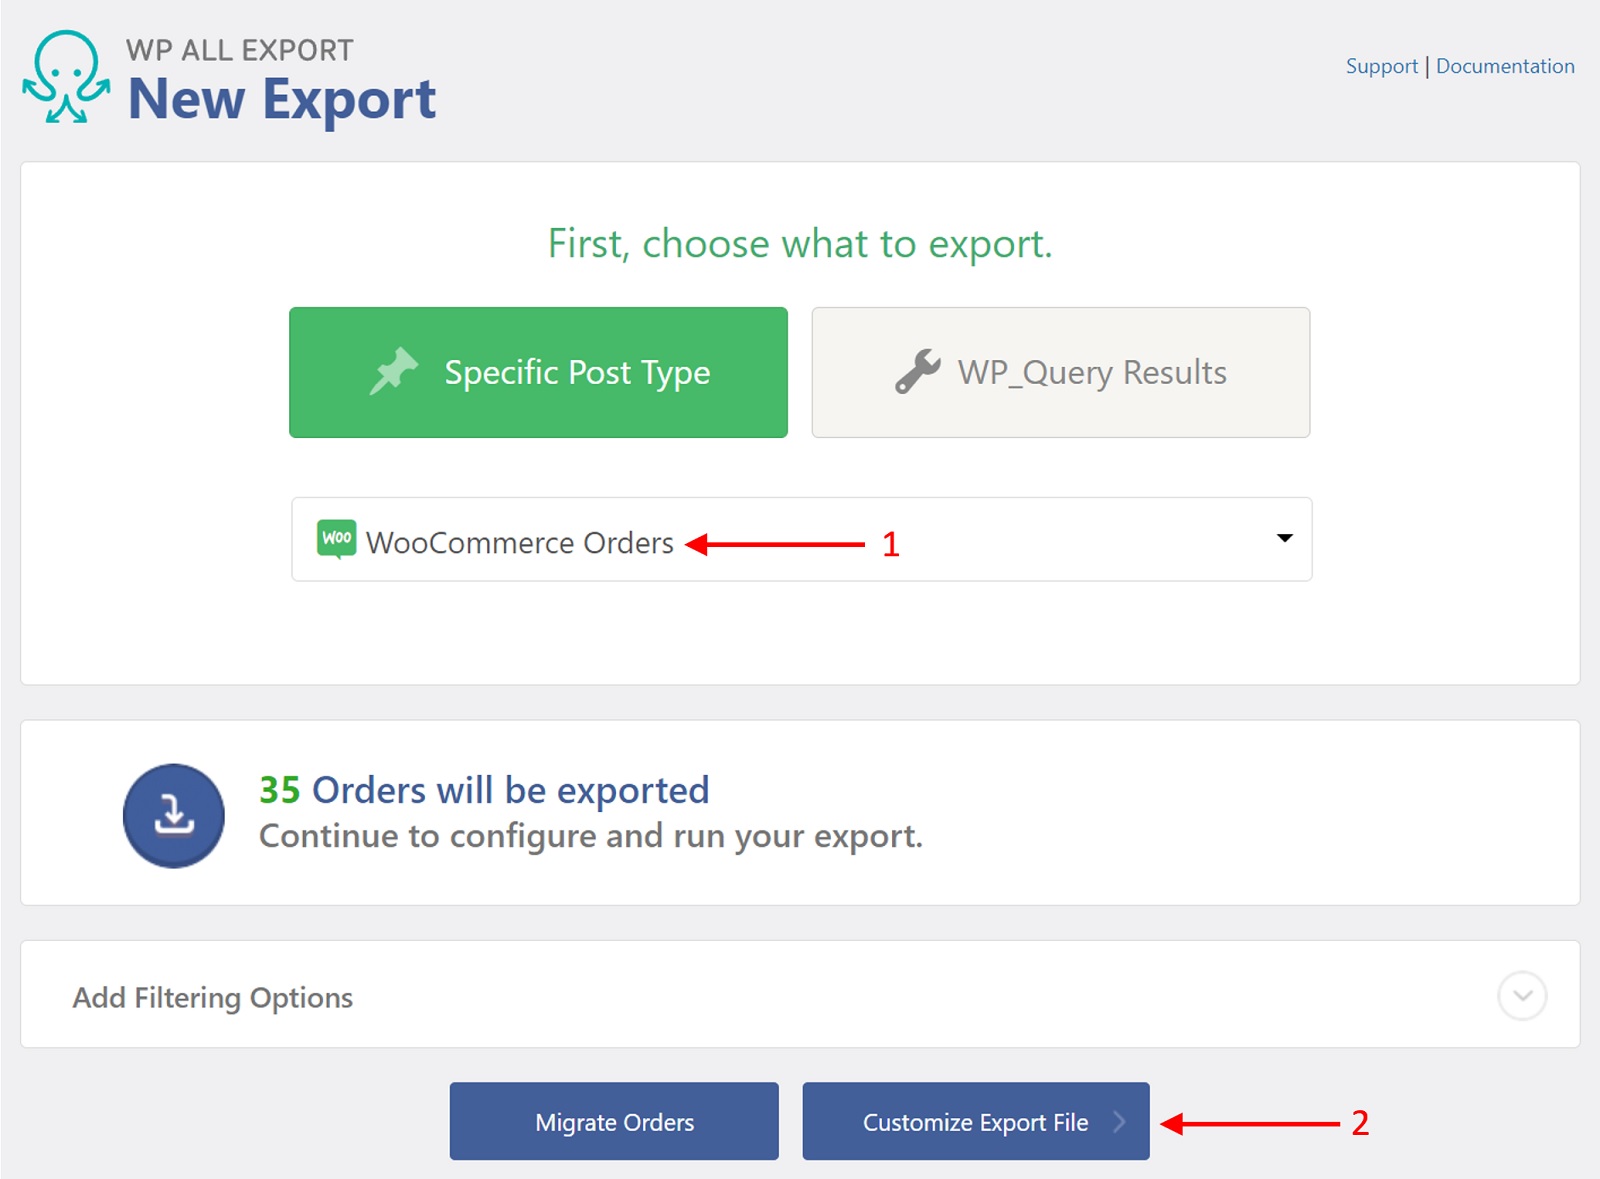 How to Export WooCommerce Orders to CSV, Excel, or XML - WP All Import